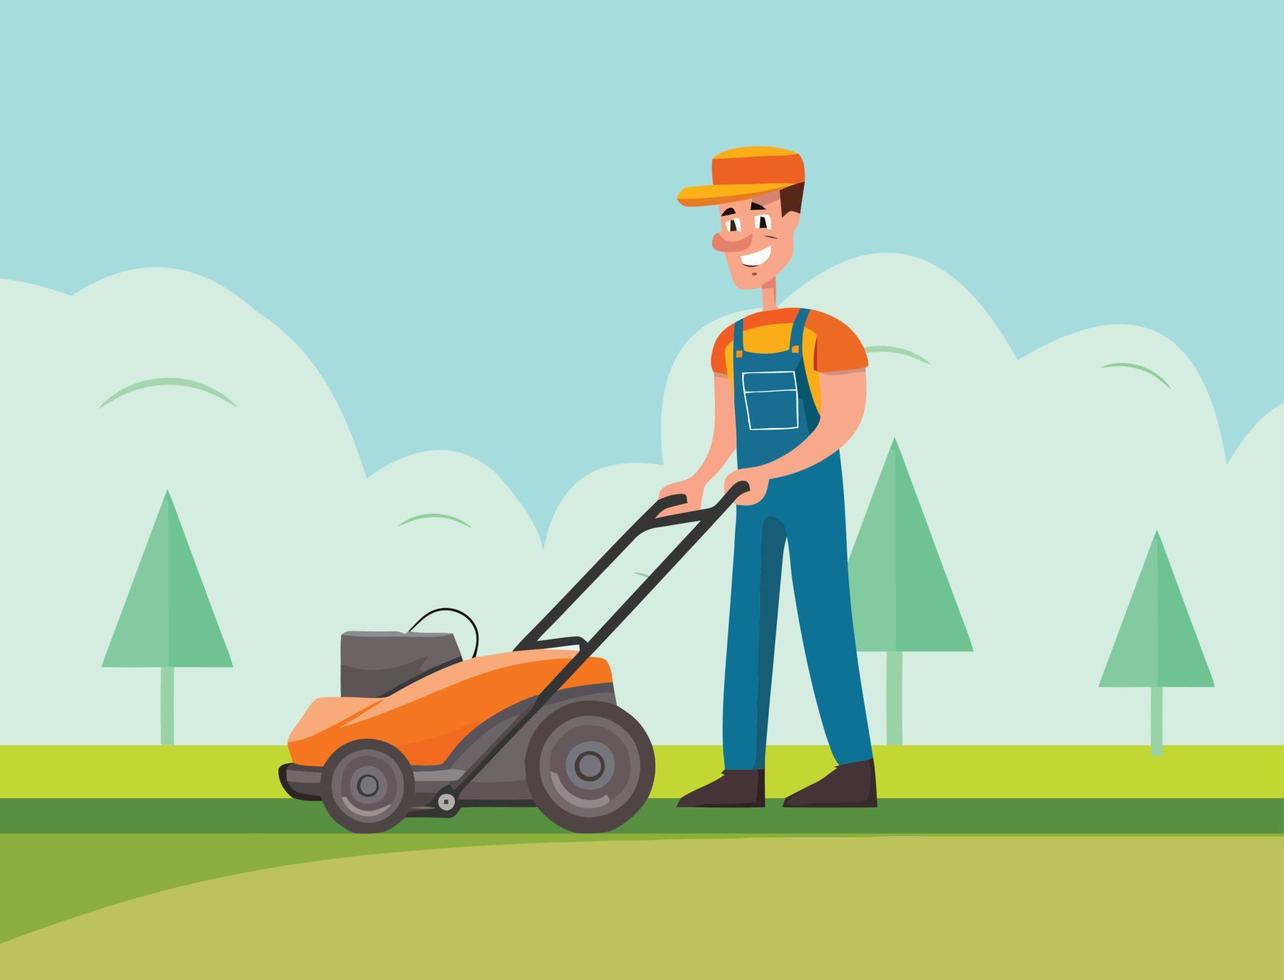 Man is using a lawn mower in the backyard flat vector